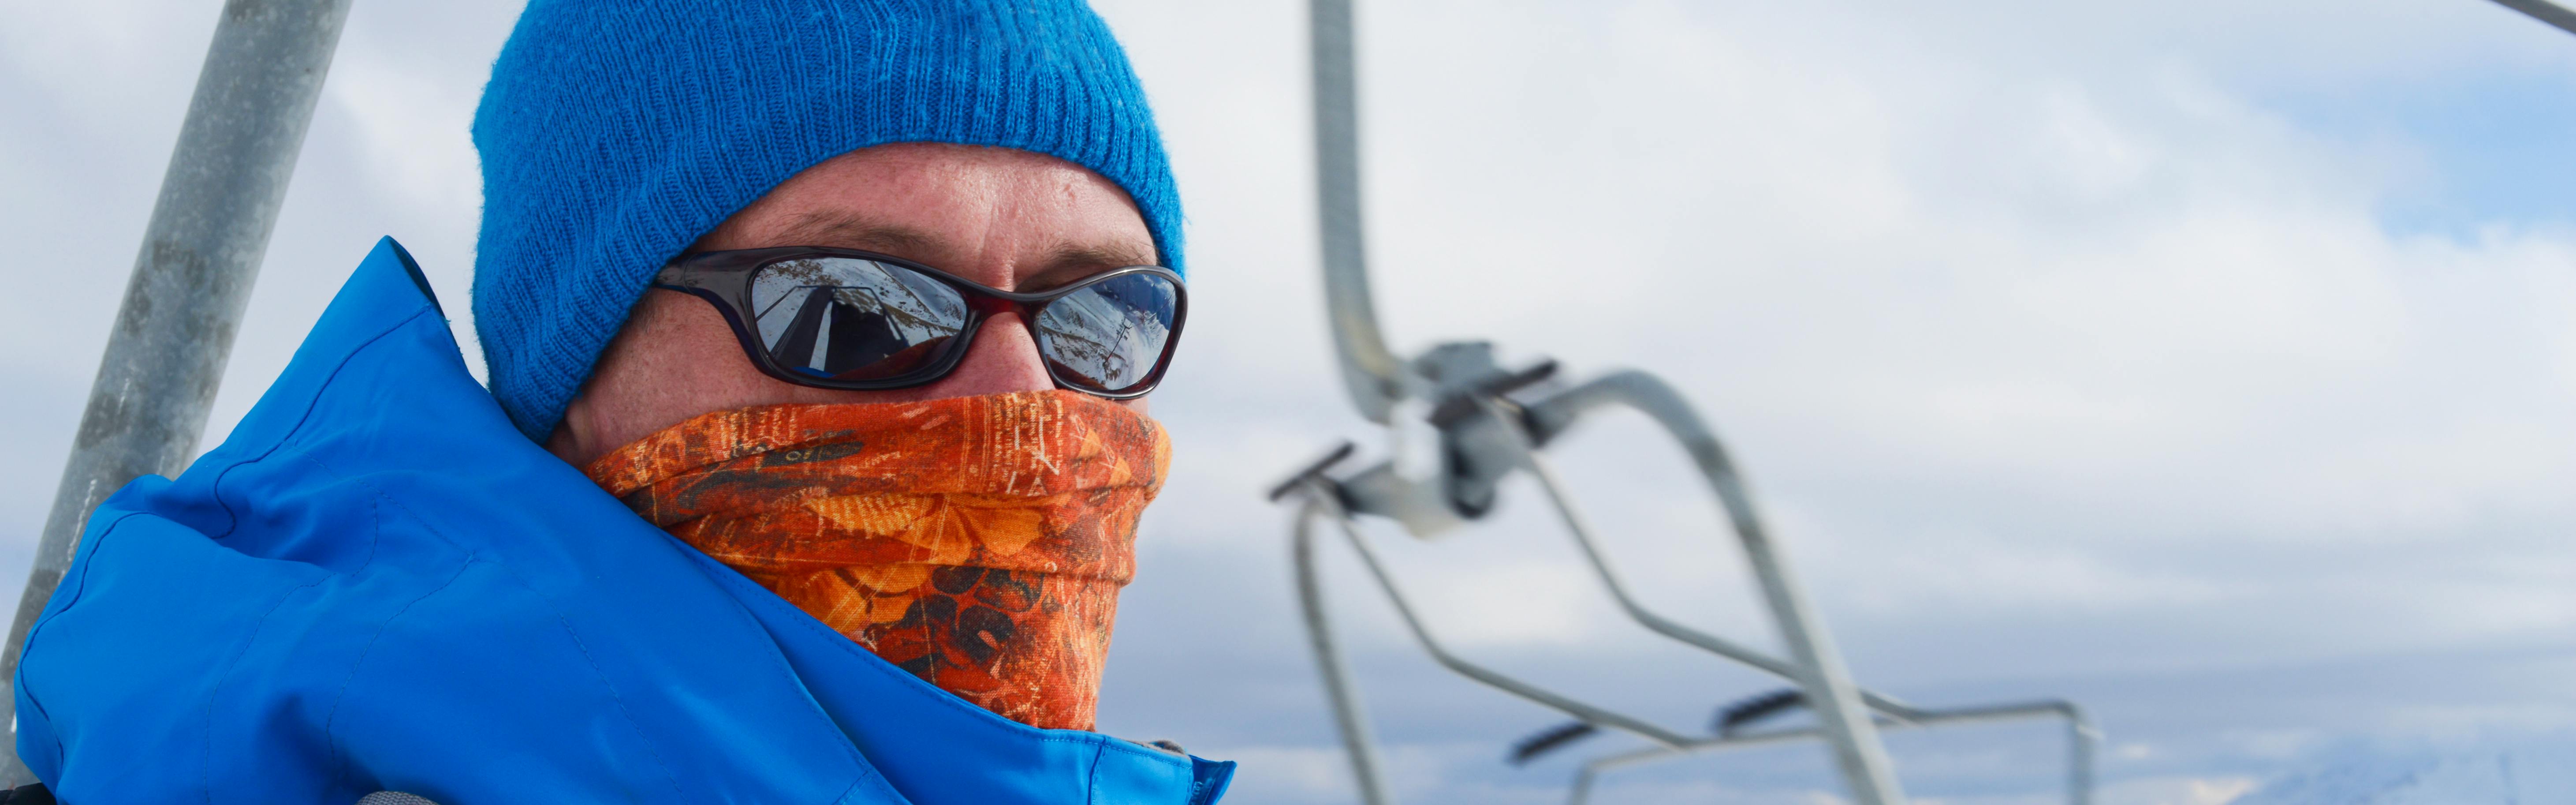 Goggles vs. Sunglasses: What Should You Wear for Snowboarding